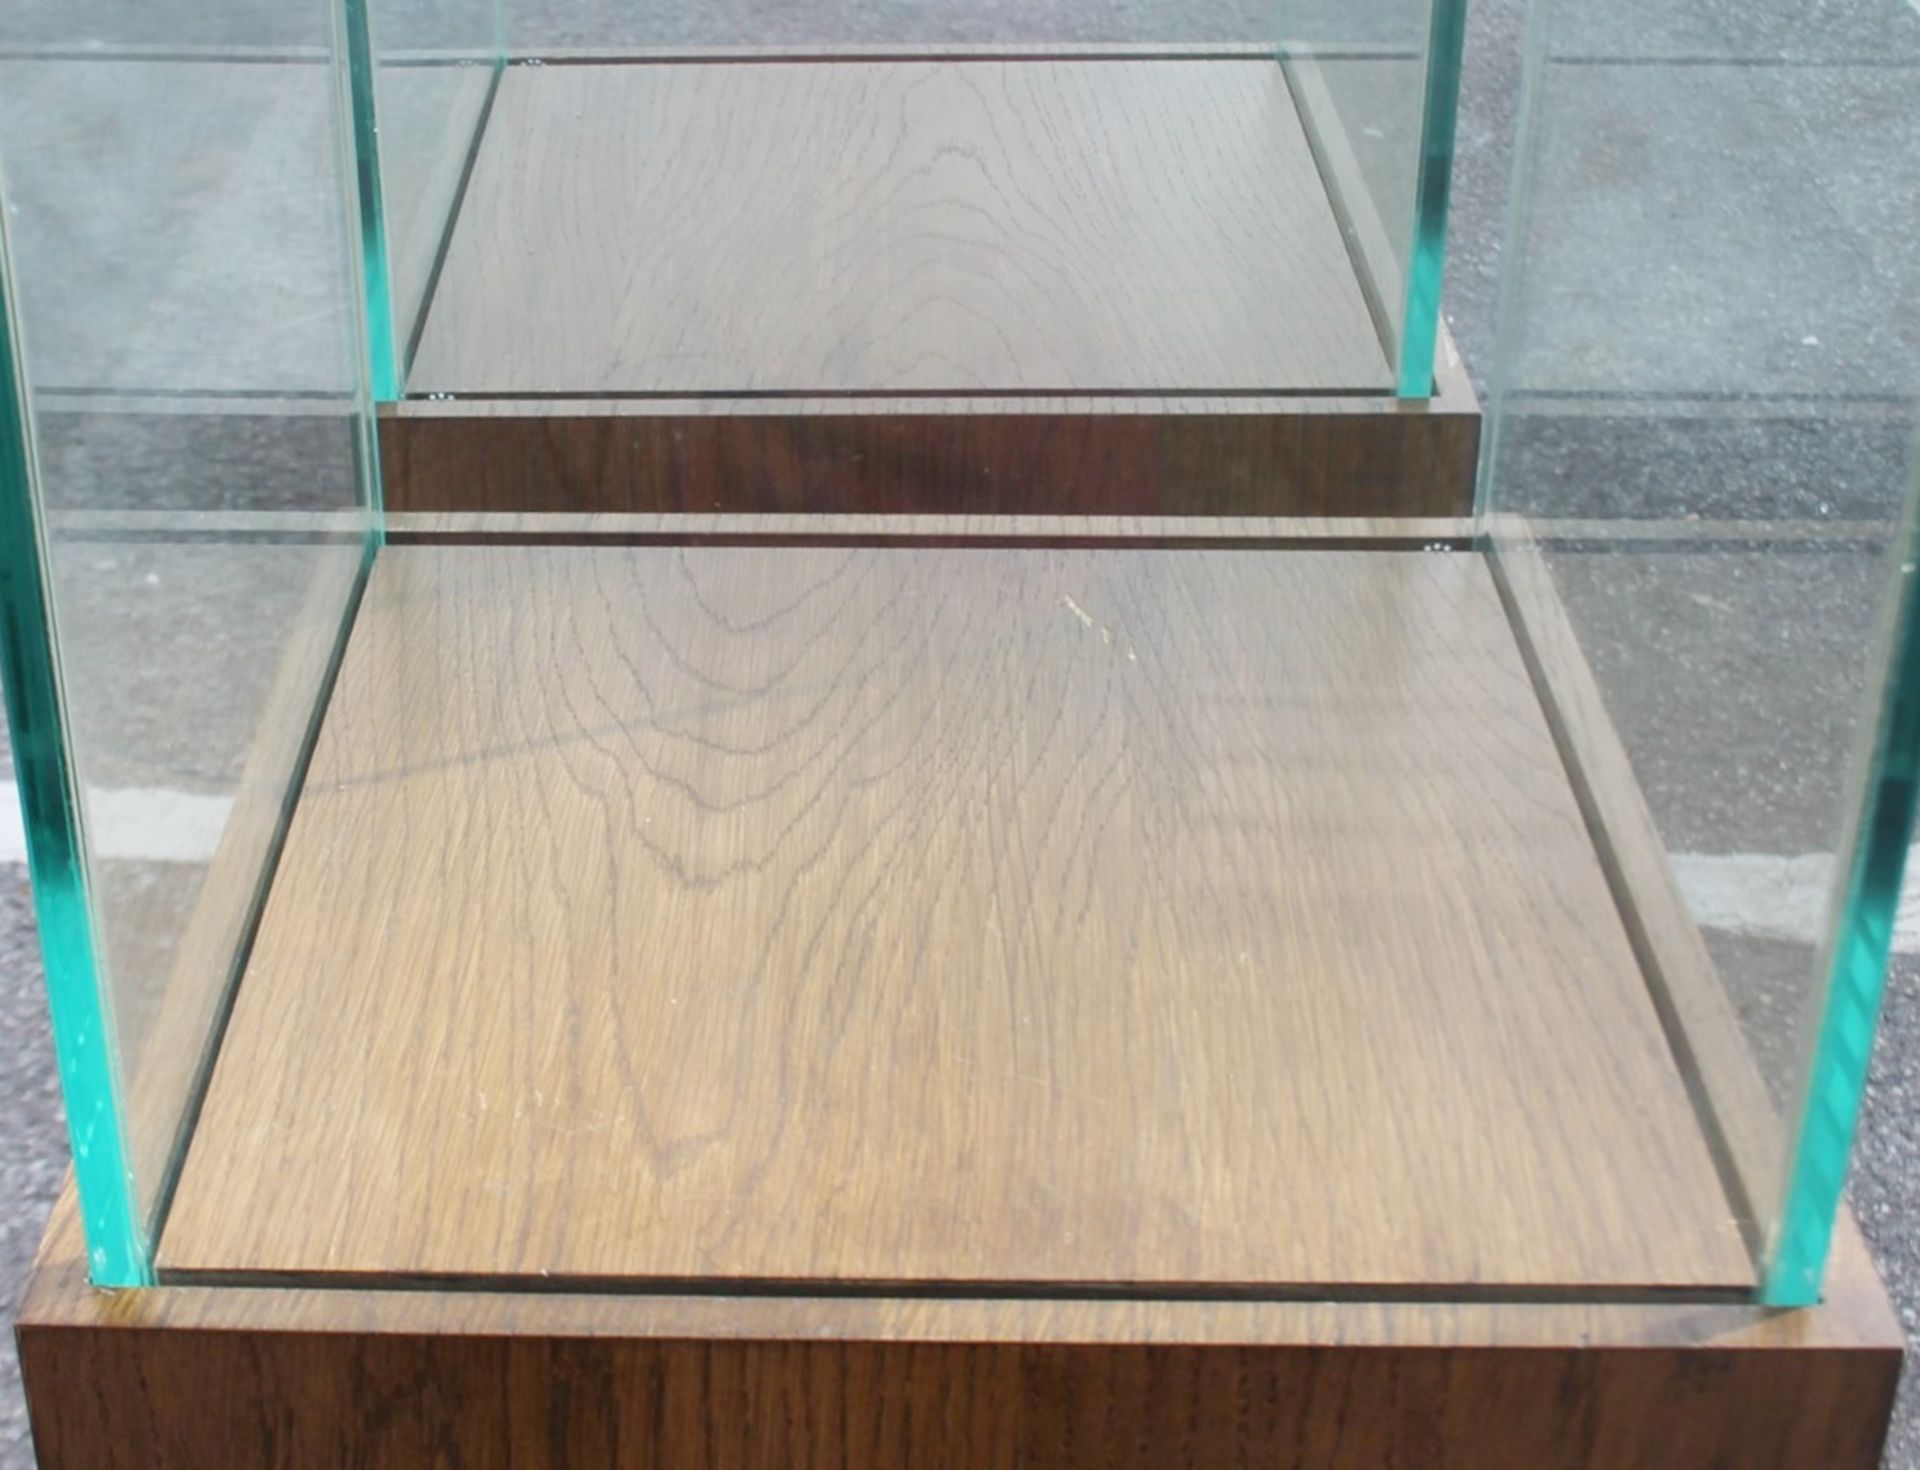 A Pair Of Wooden Plinths With Glass Tops - Recently Removed From A World-renowned London - Image 5 of 5